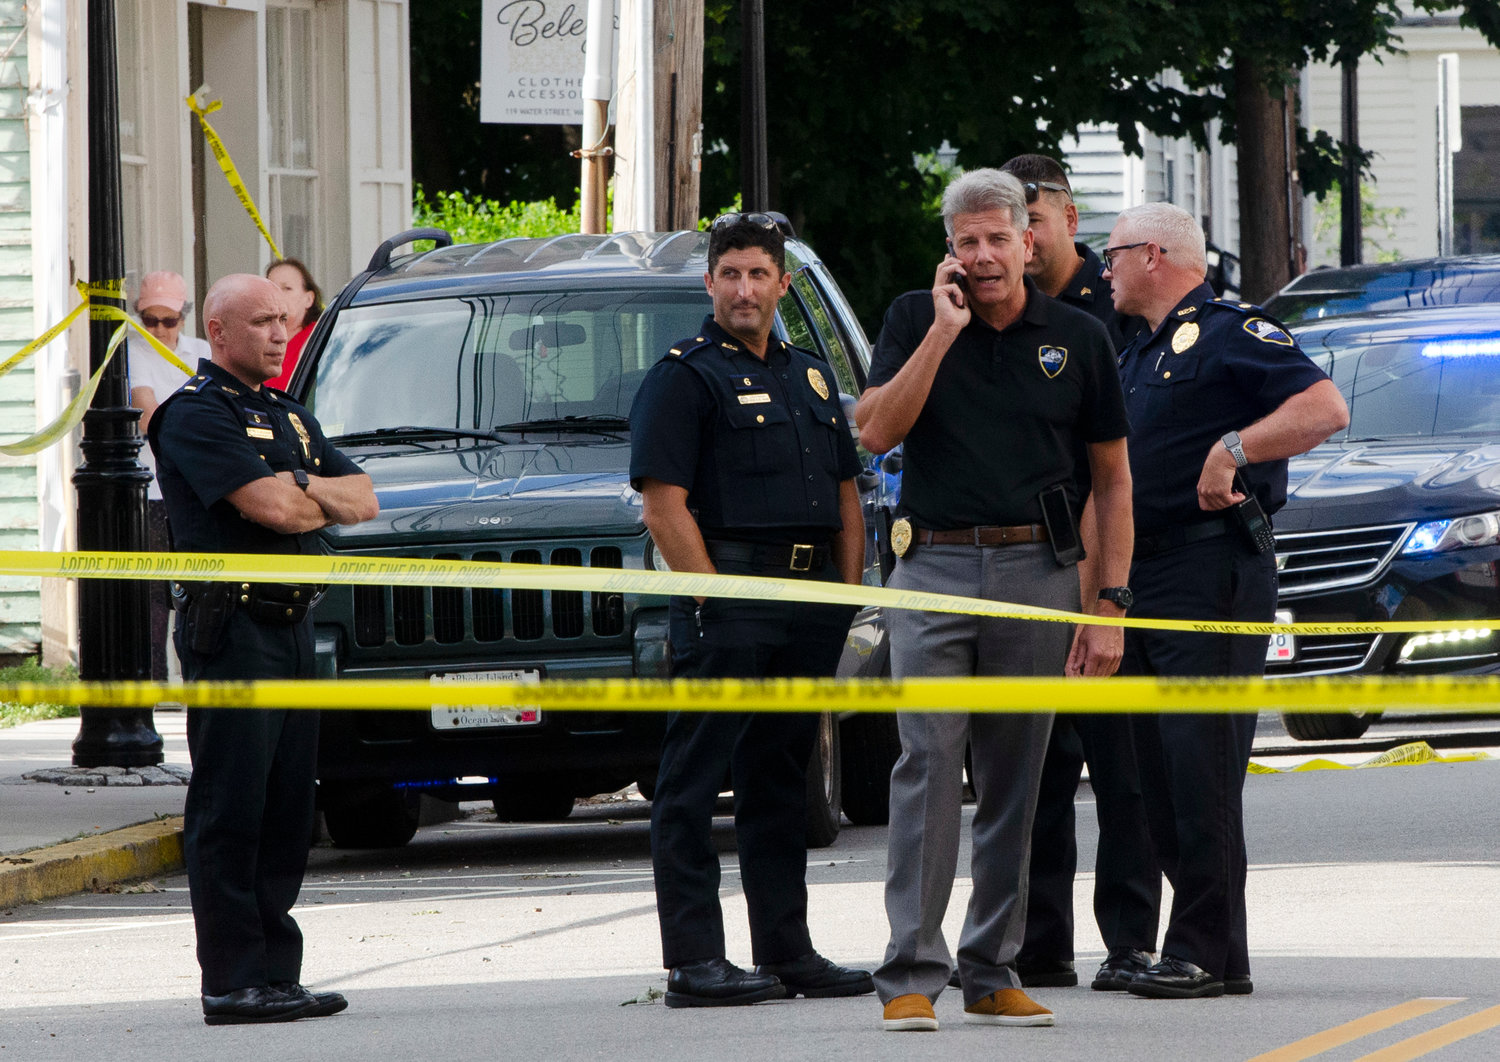 Standing inside the yellow tape moments after gunfire took place on Water Street in Warren last Thursday are (left to right) an unidentified officer, Bristol Police Lt. Steven St. Pierre, Bristol Police Chief Kevin Lynch (on phone) and Bristol Police Major Scott McNally. Chief Lynch and Major McNally were driving north when they took fire from the murder suspect and Officer McNally returned fire.